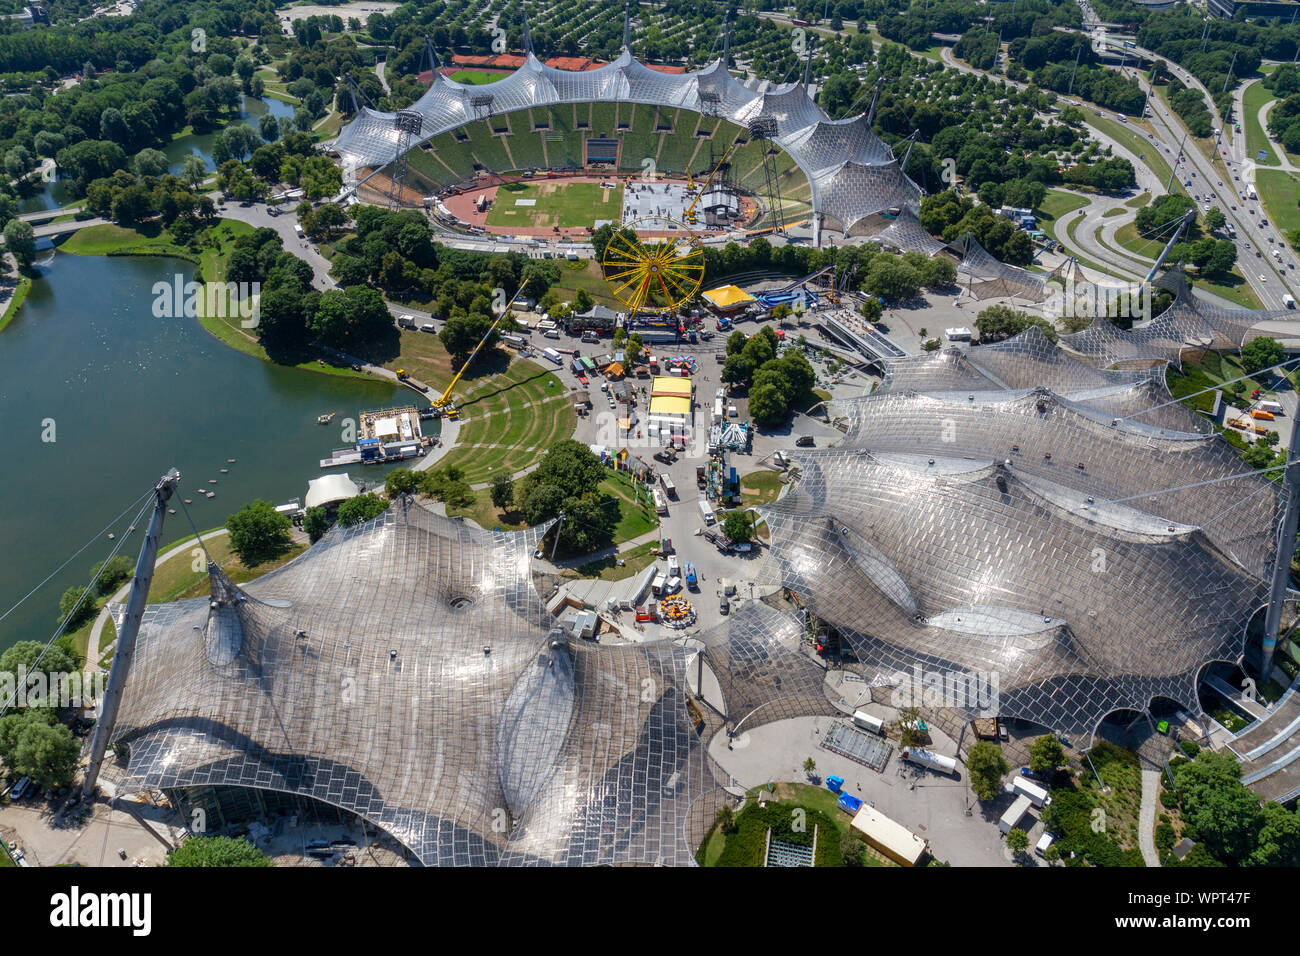 View of the 1972 Olympic Park and Stadium from the Olympiaturm (Olympic Tower), Munich, Bavaria, Germany. Stock Photo